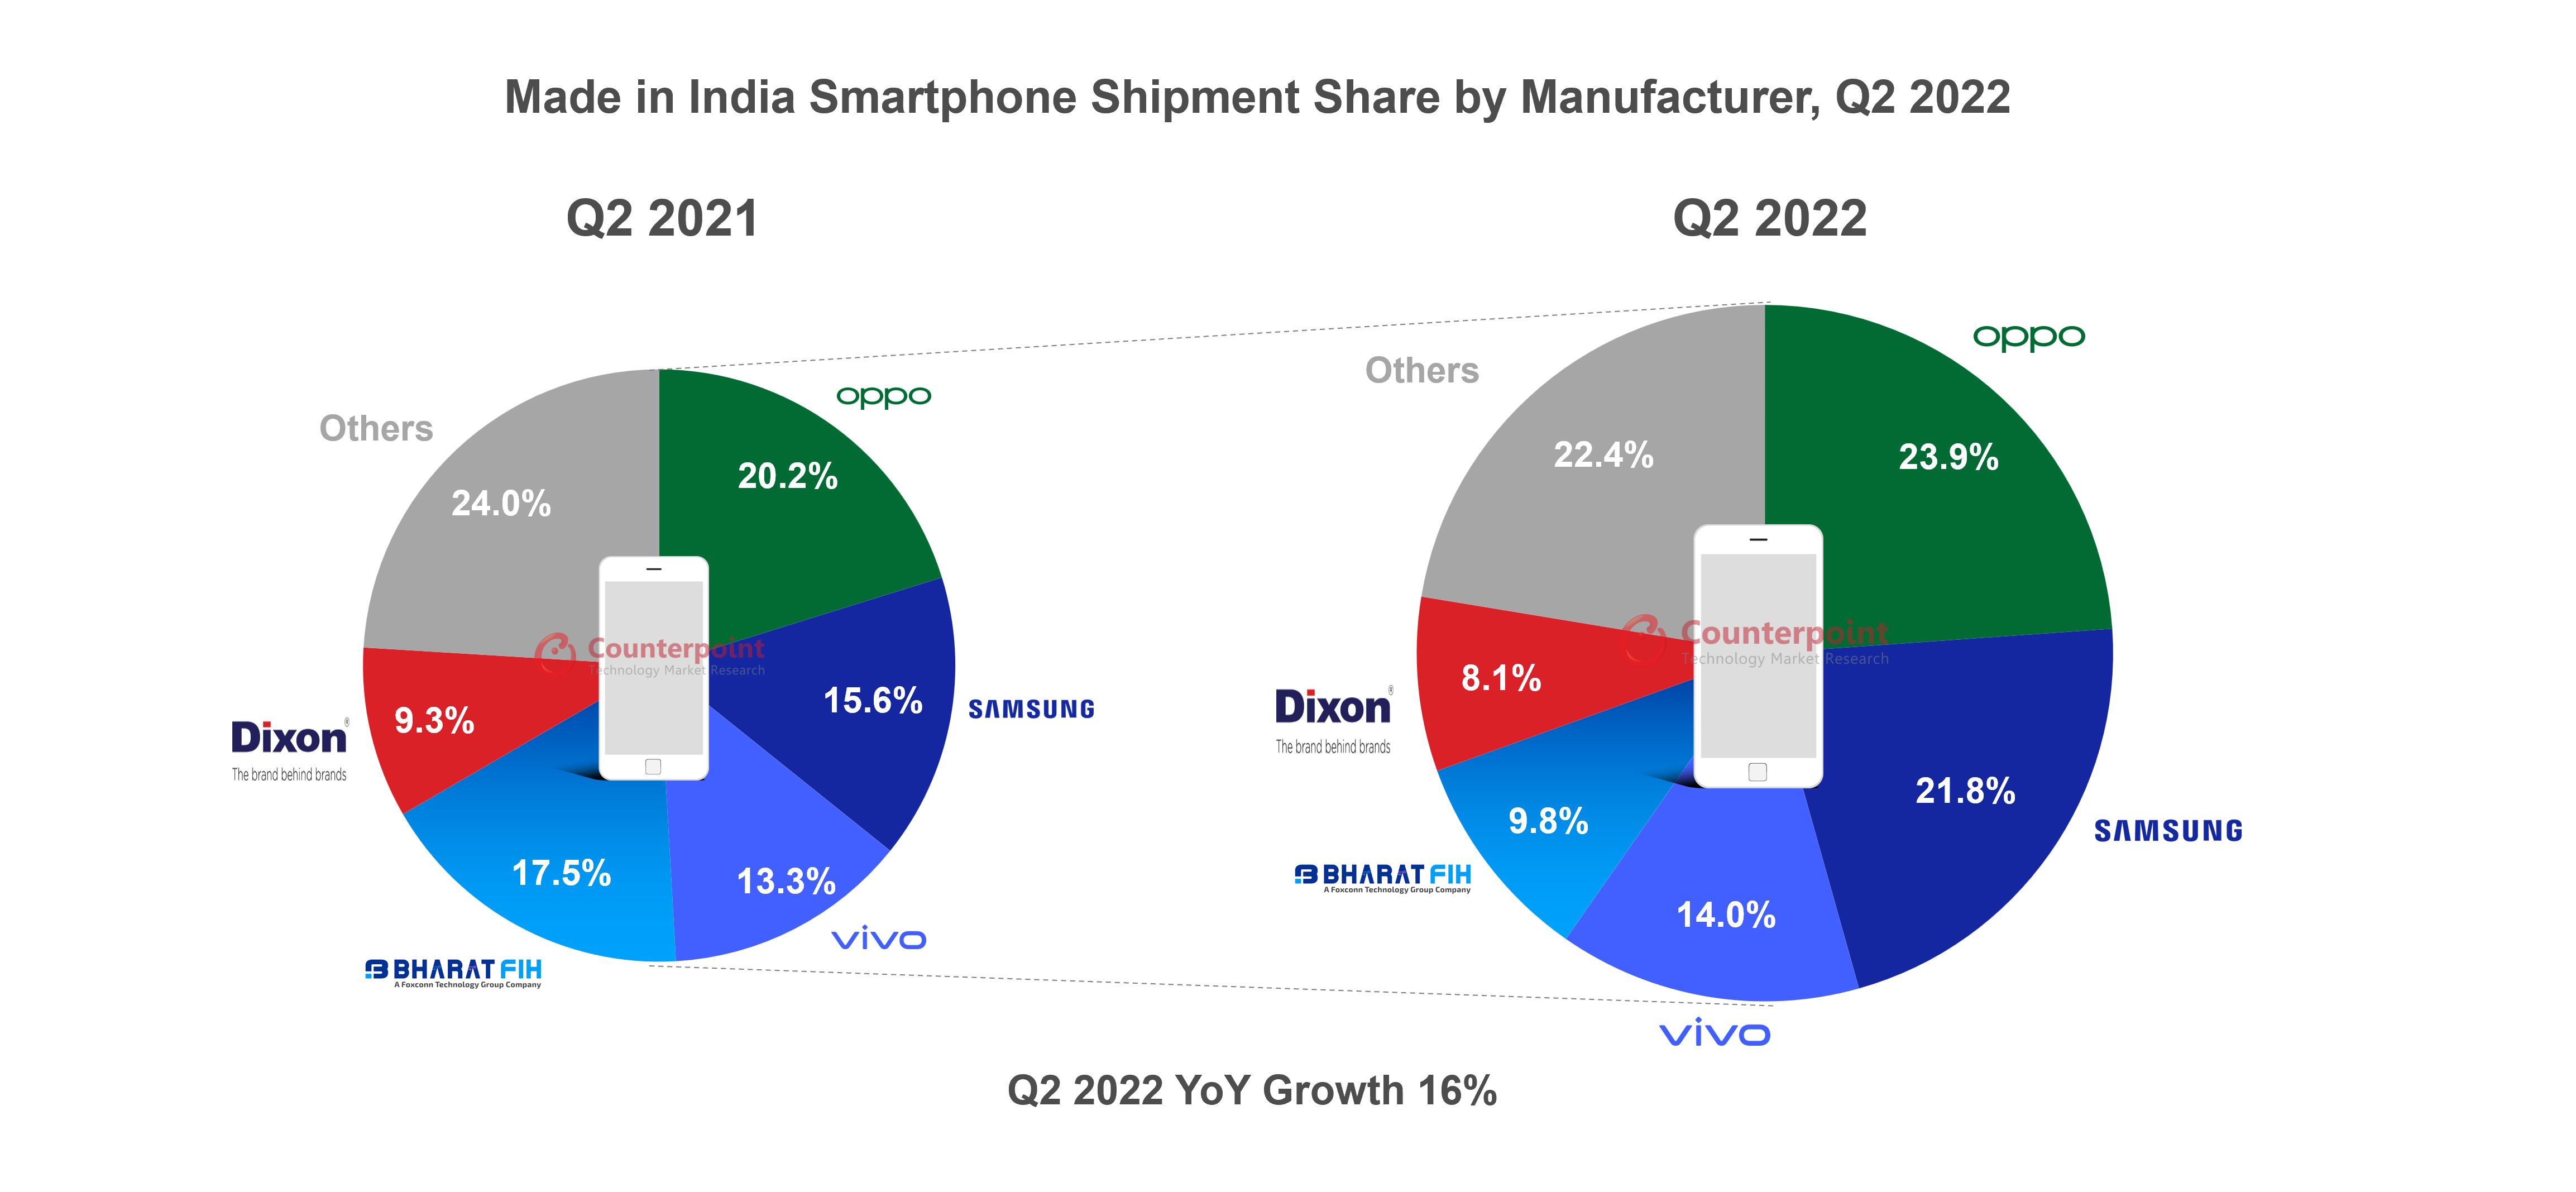 Counterpoint Research - Made in India Smartphone Shipments by Manufacturer Q2 2022